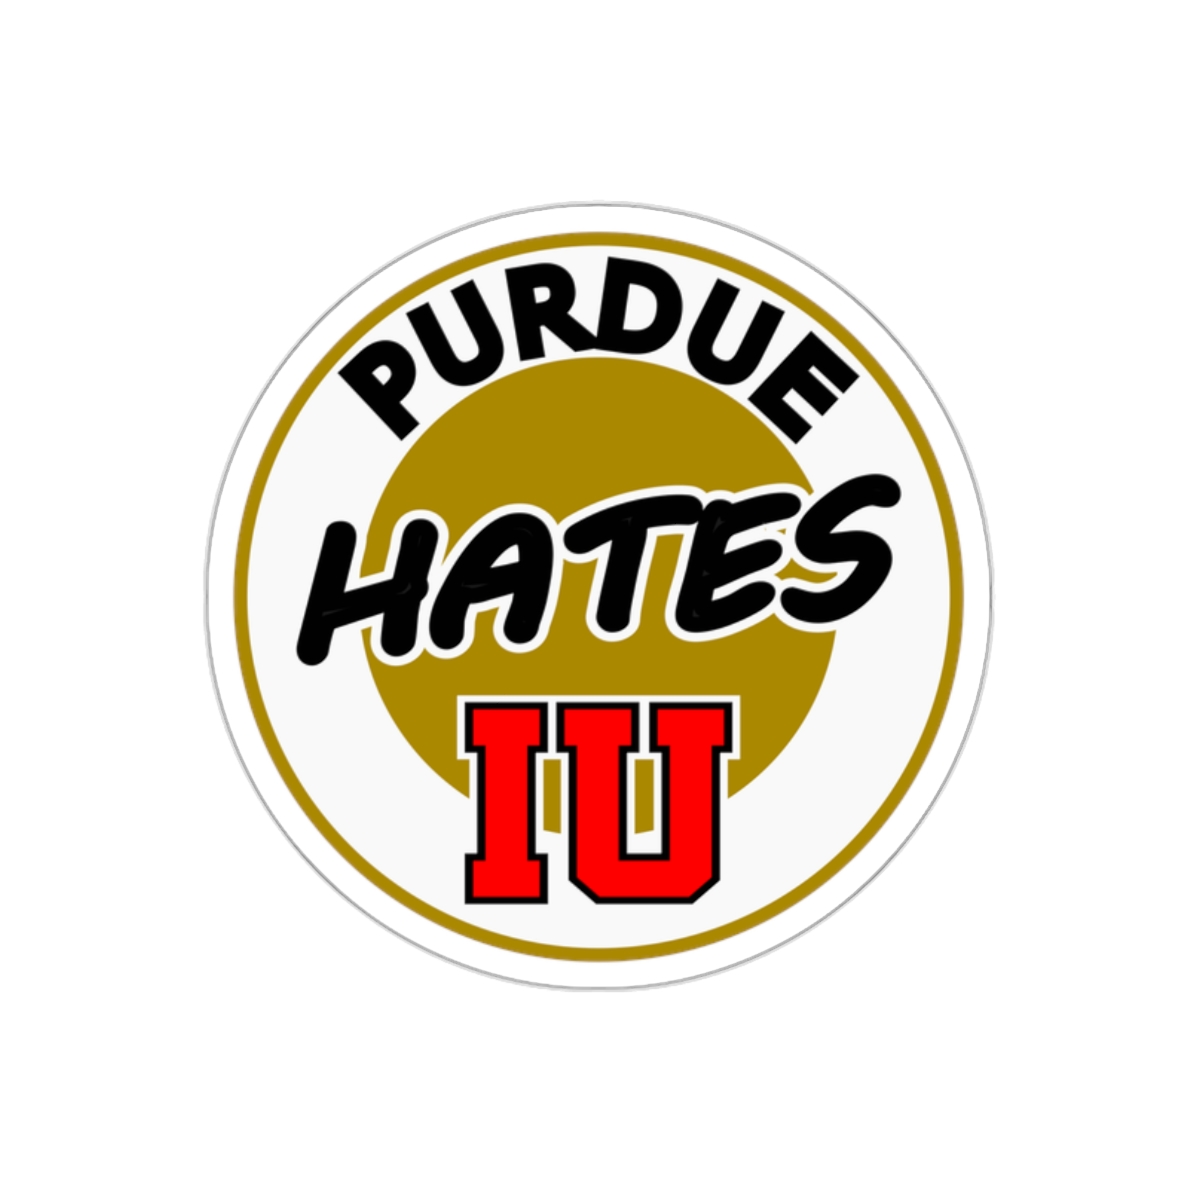 Purdue Hates IU Stickers product thumbnail image